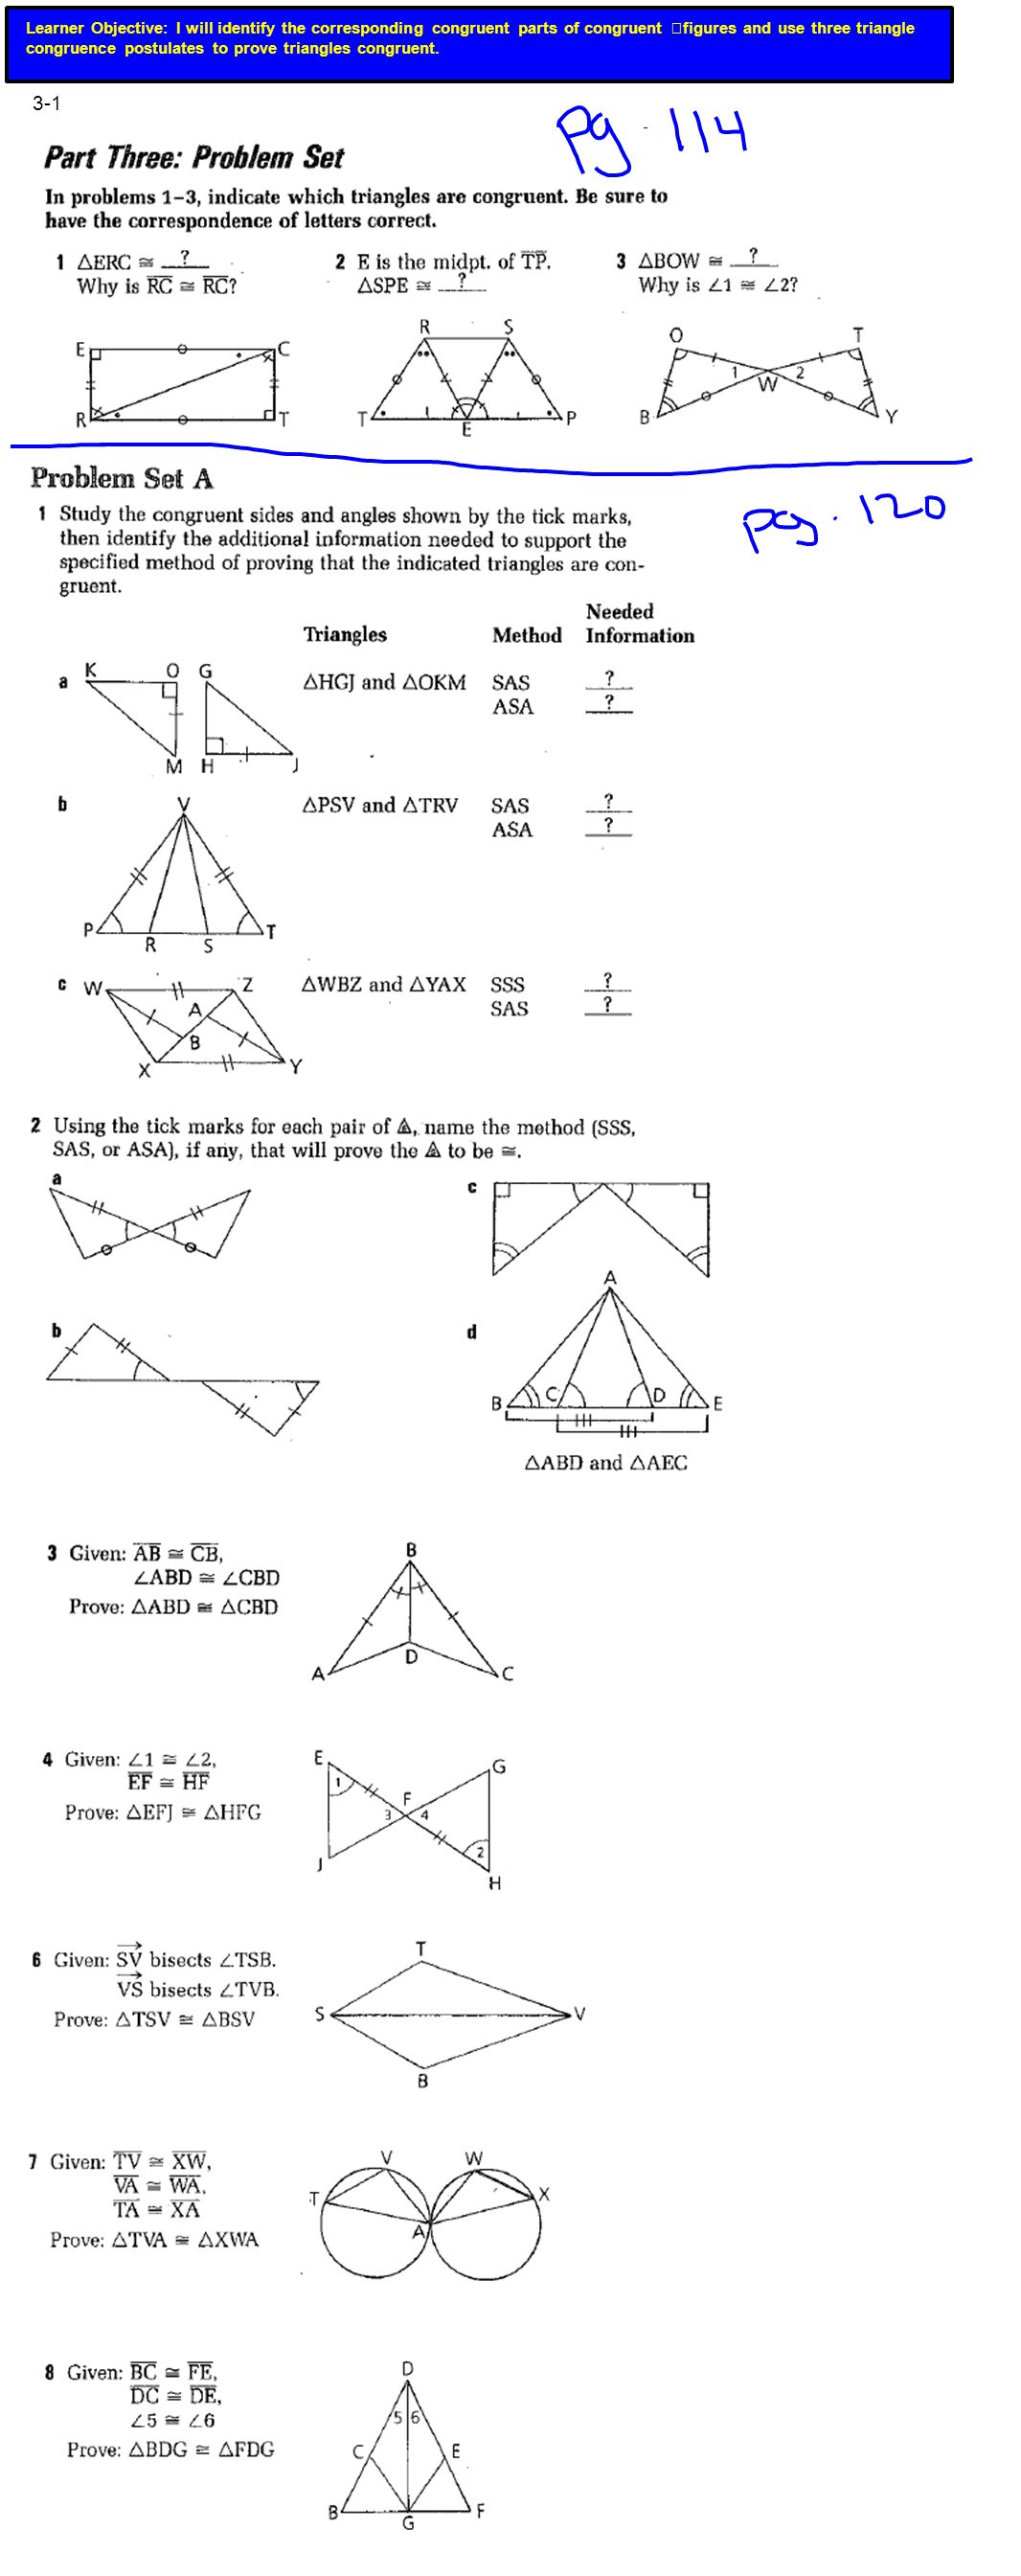 3-1 Learner Objective: I will identify the corresponding congruent parts of congruent figures and use three triangle congruence postulates to prove triangles congruent.